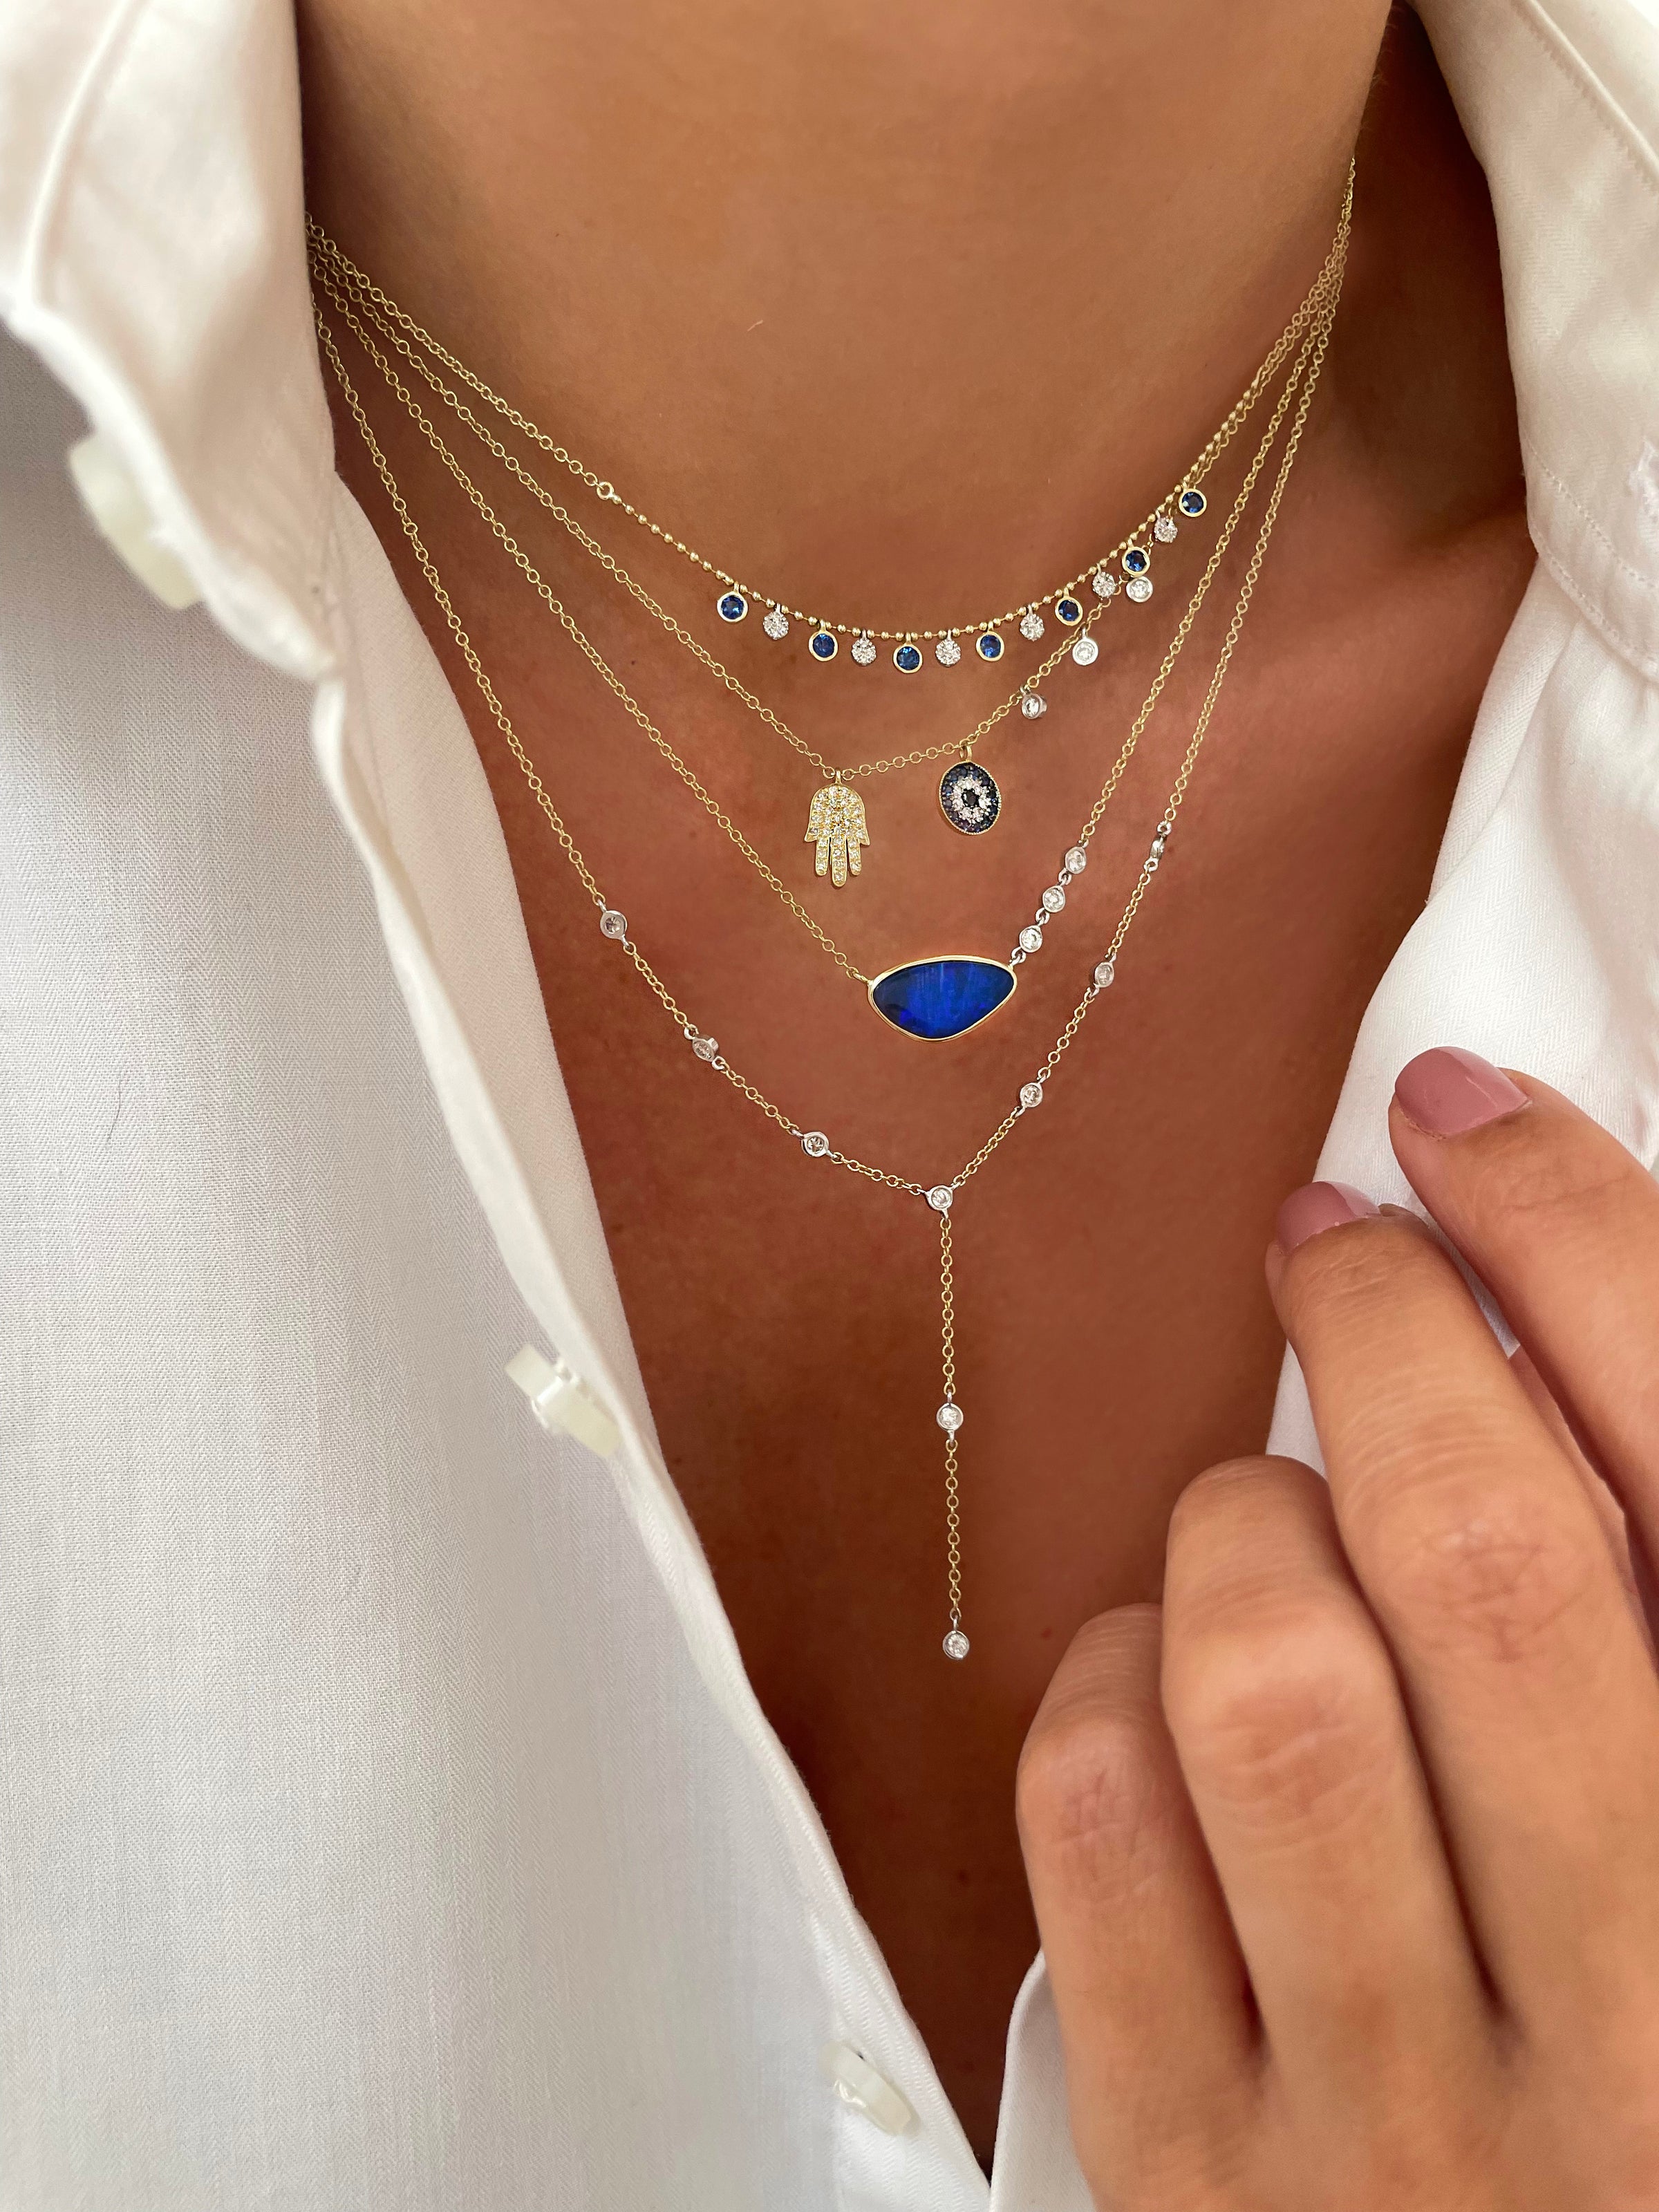 Hamsa Evil Eye Necklace 18kt Gold Filled Hand of Fatima Blye Eye Charm  Necklaces Women Girls Jewelry Box Chain Protection Gift for Her - Etsy  India | Evil eye necklace, Hamsa hand